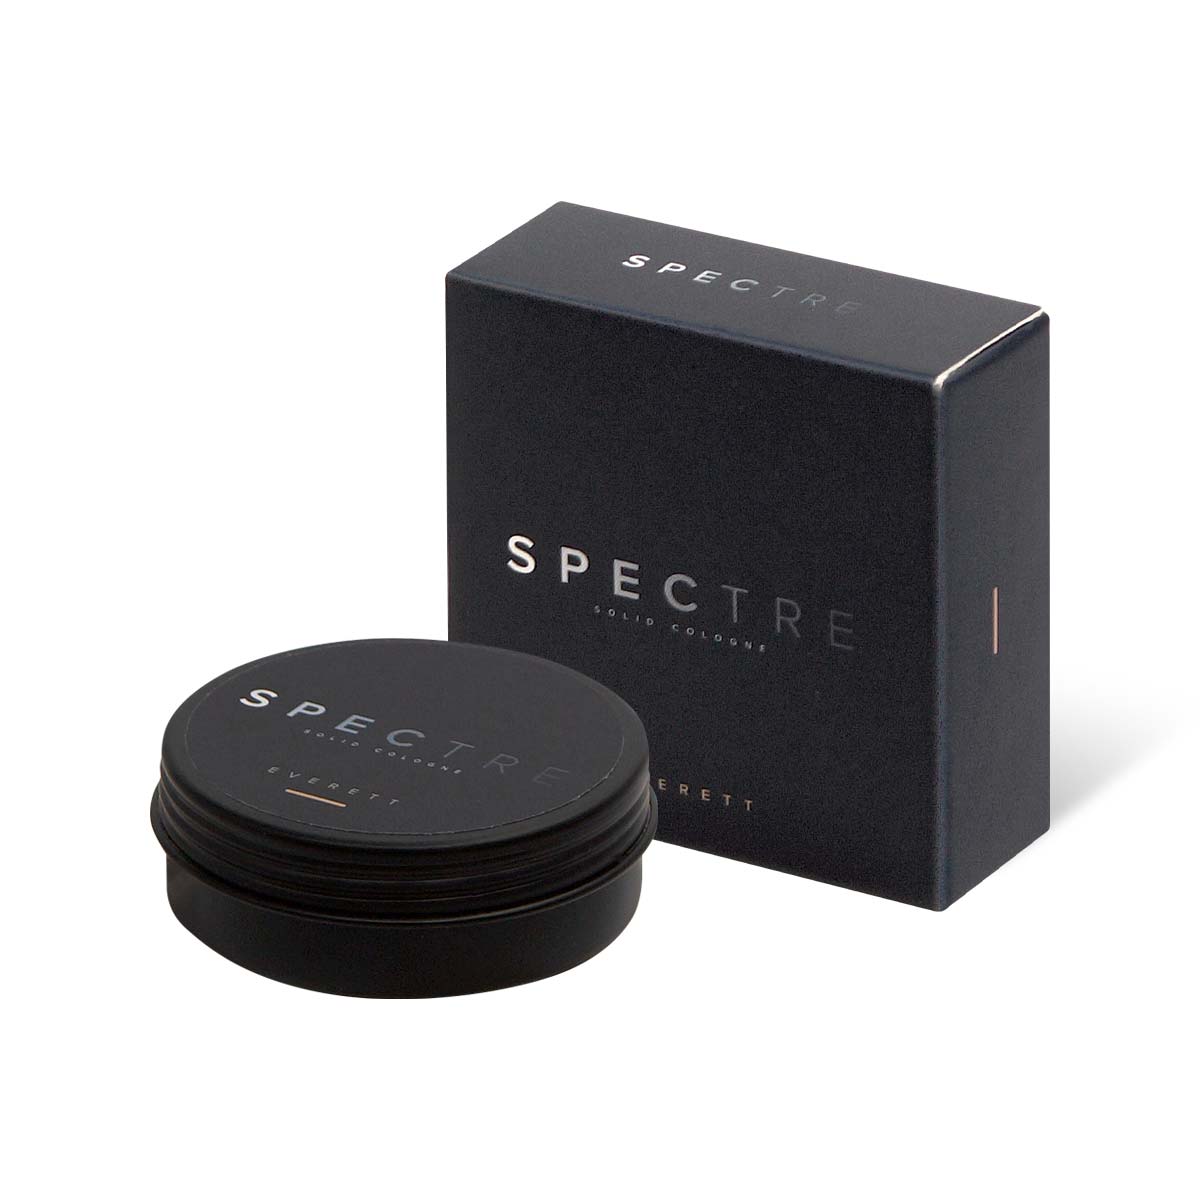 Spectre Everett Solid Cologne 25g-thumb_1